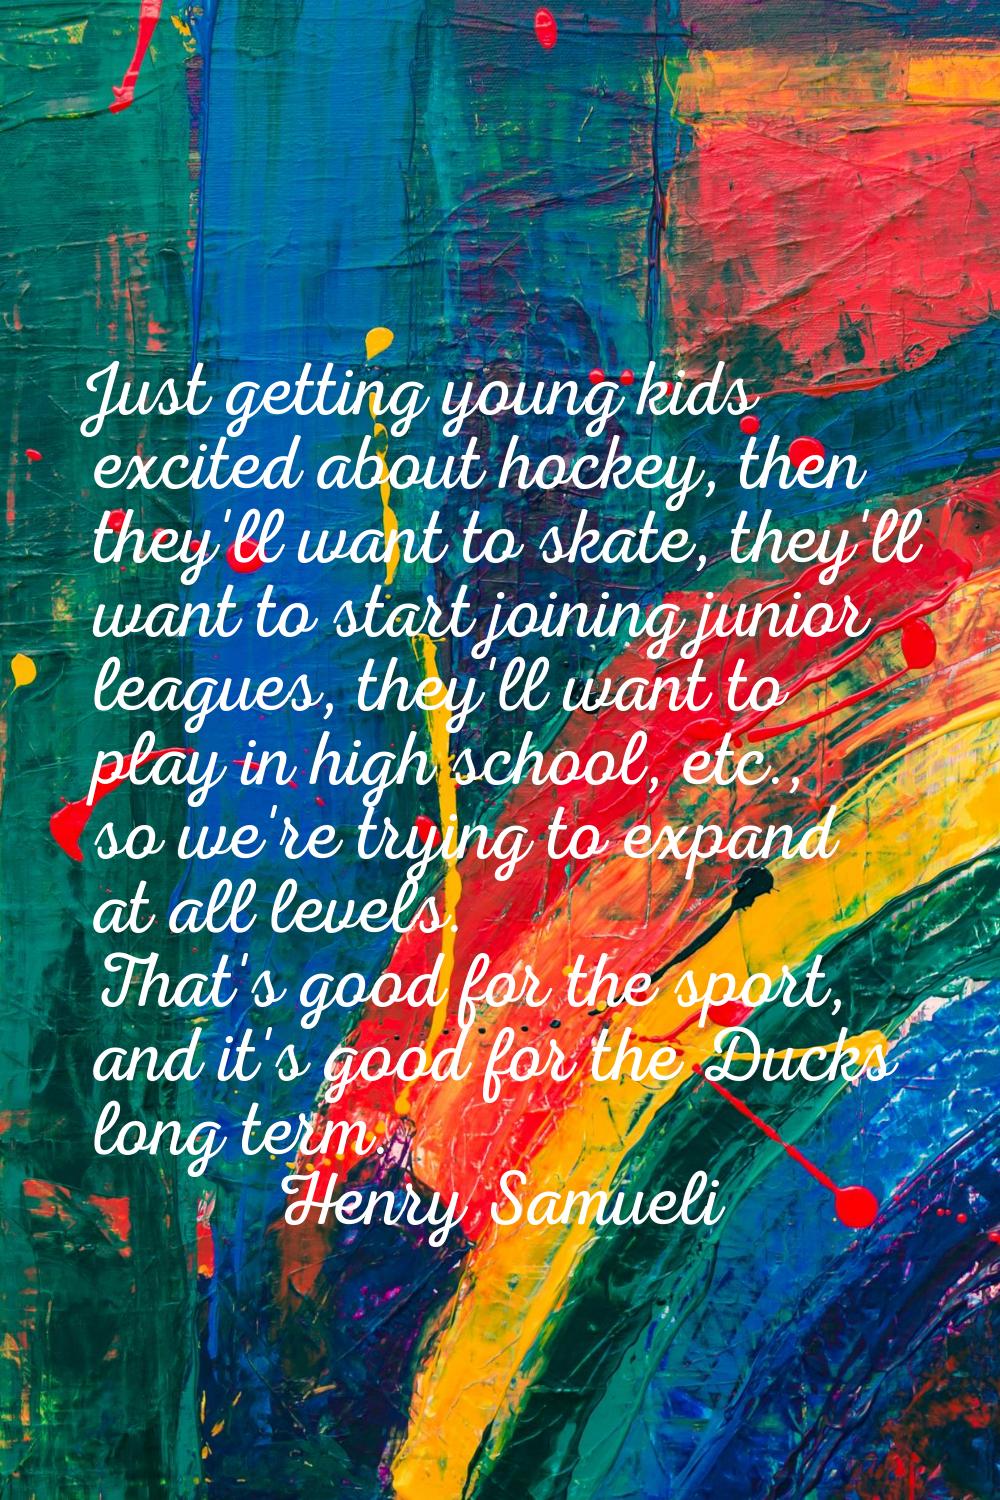 Just getting young kids excited about hockey, then they'll want to skate, they'll want to start joi